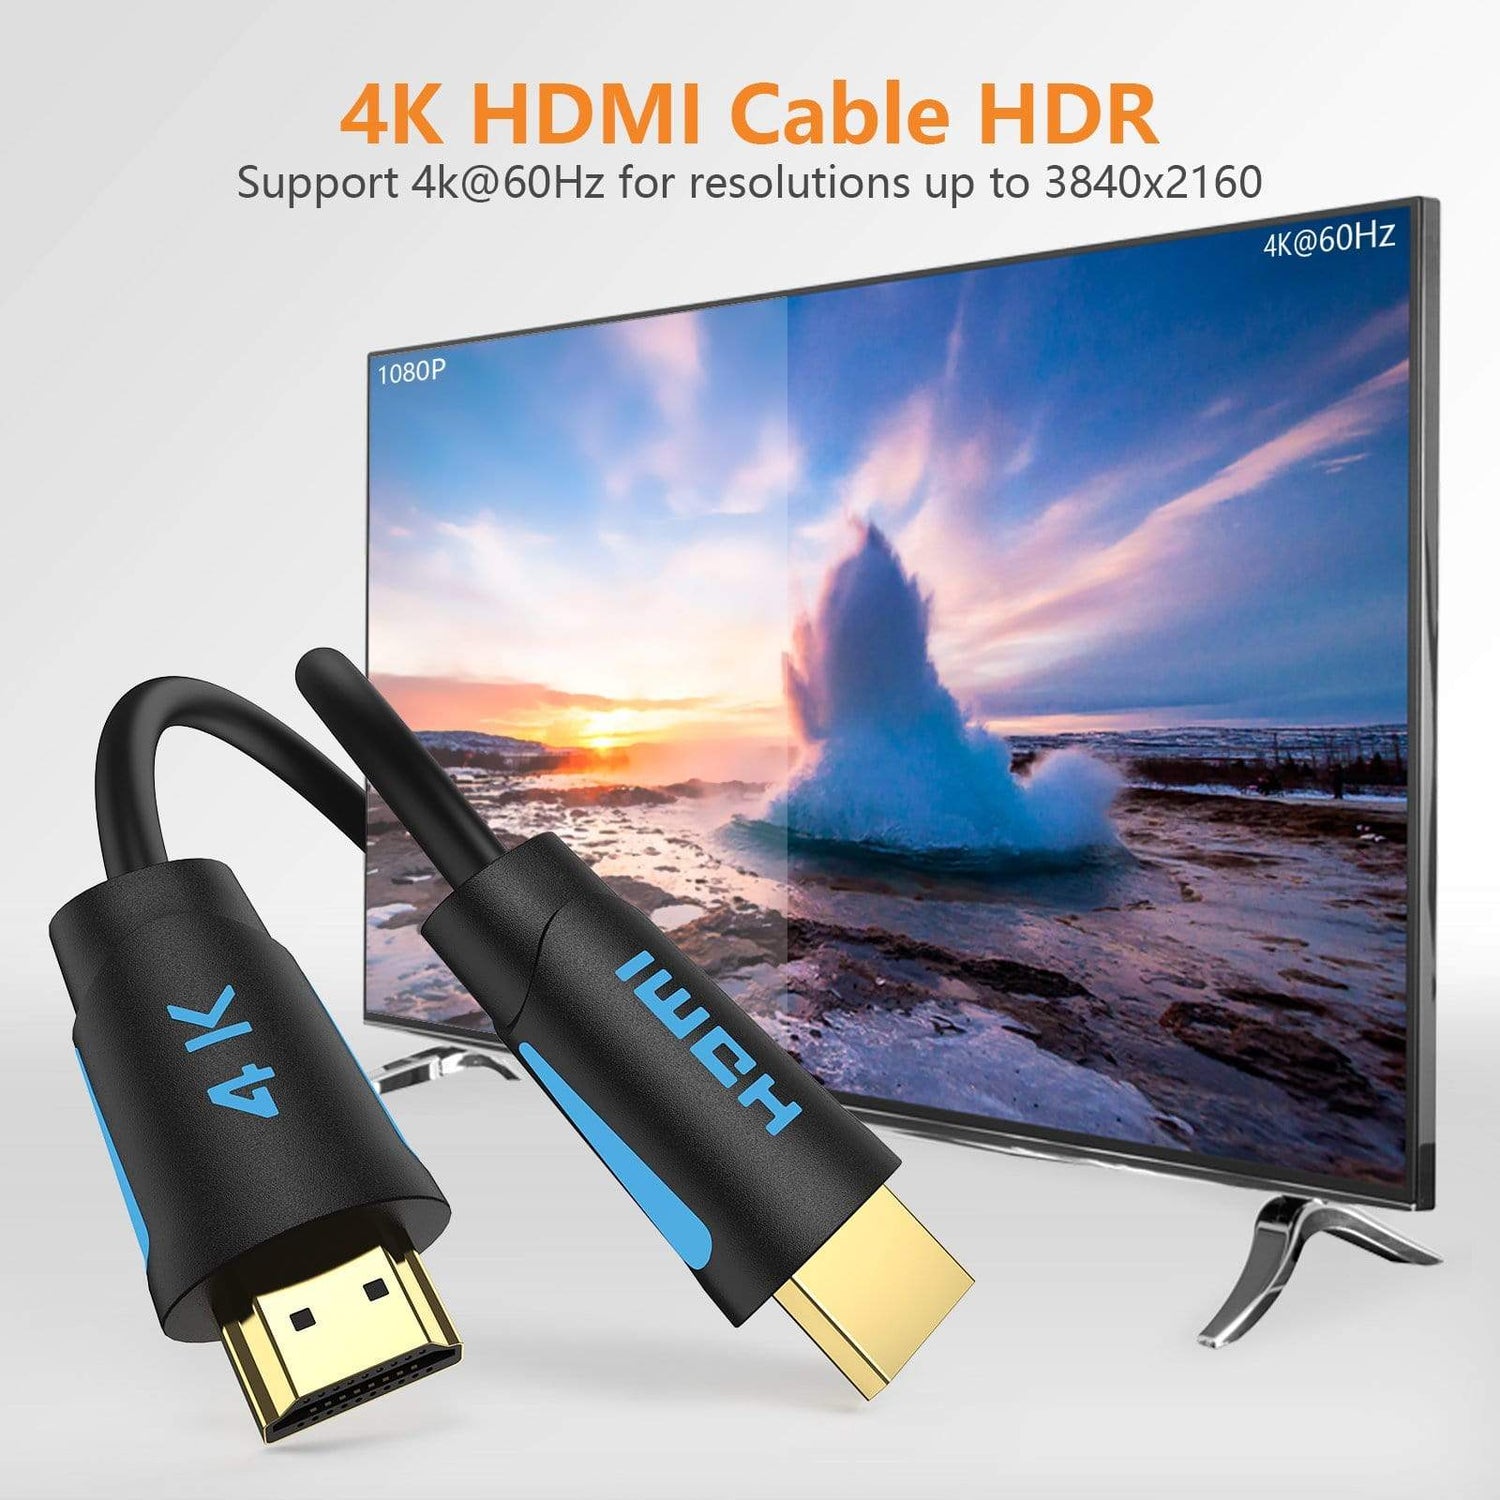 TESmart TESmart Accessoriess 4K HDMI Cable 5ft 18Gbps Supports 3D 4K@60Hz True HD Dolby 7.1 ARC HDCP 2.2 4K HDMI Cable Ultra HD 18Gbps 3D Dolby 7.1 ARC HDCP 2.2-TESmart